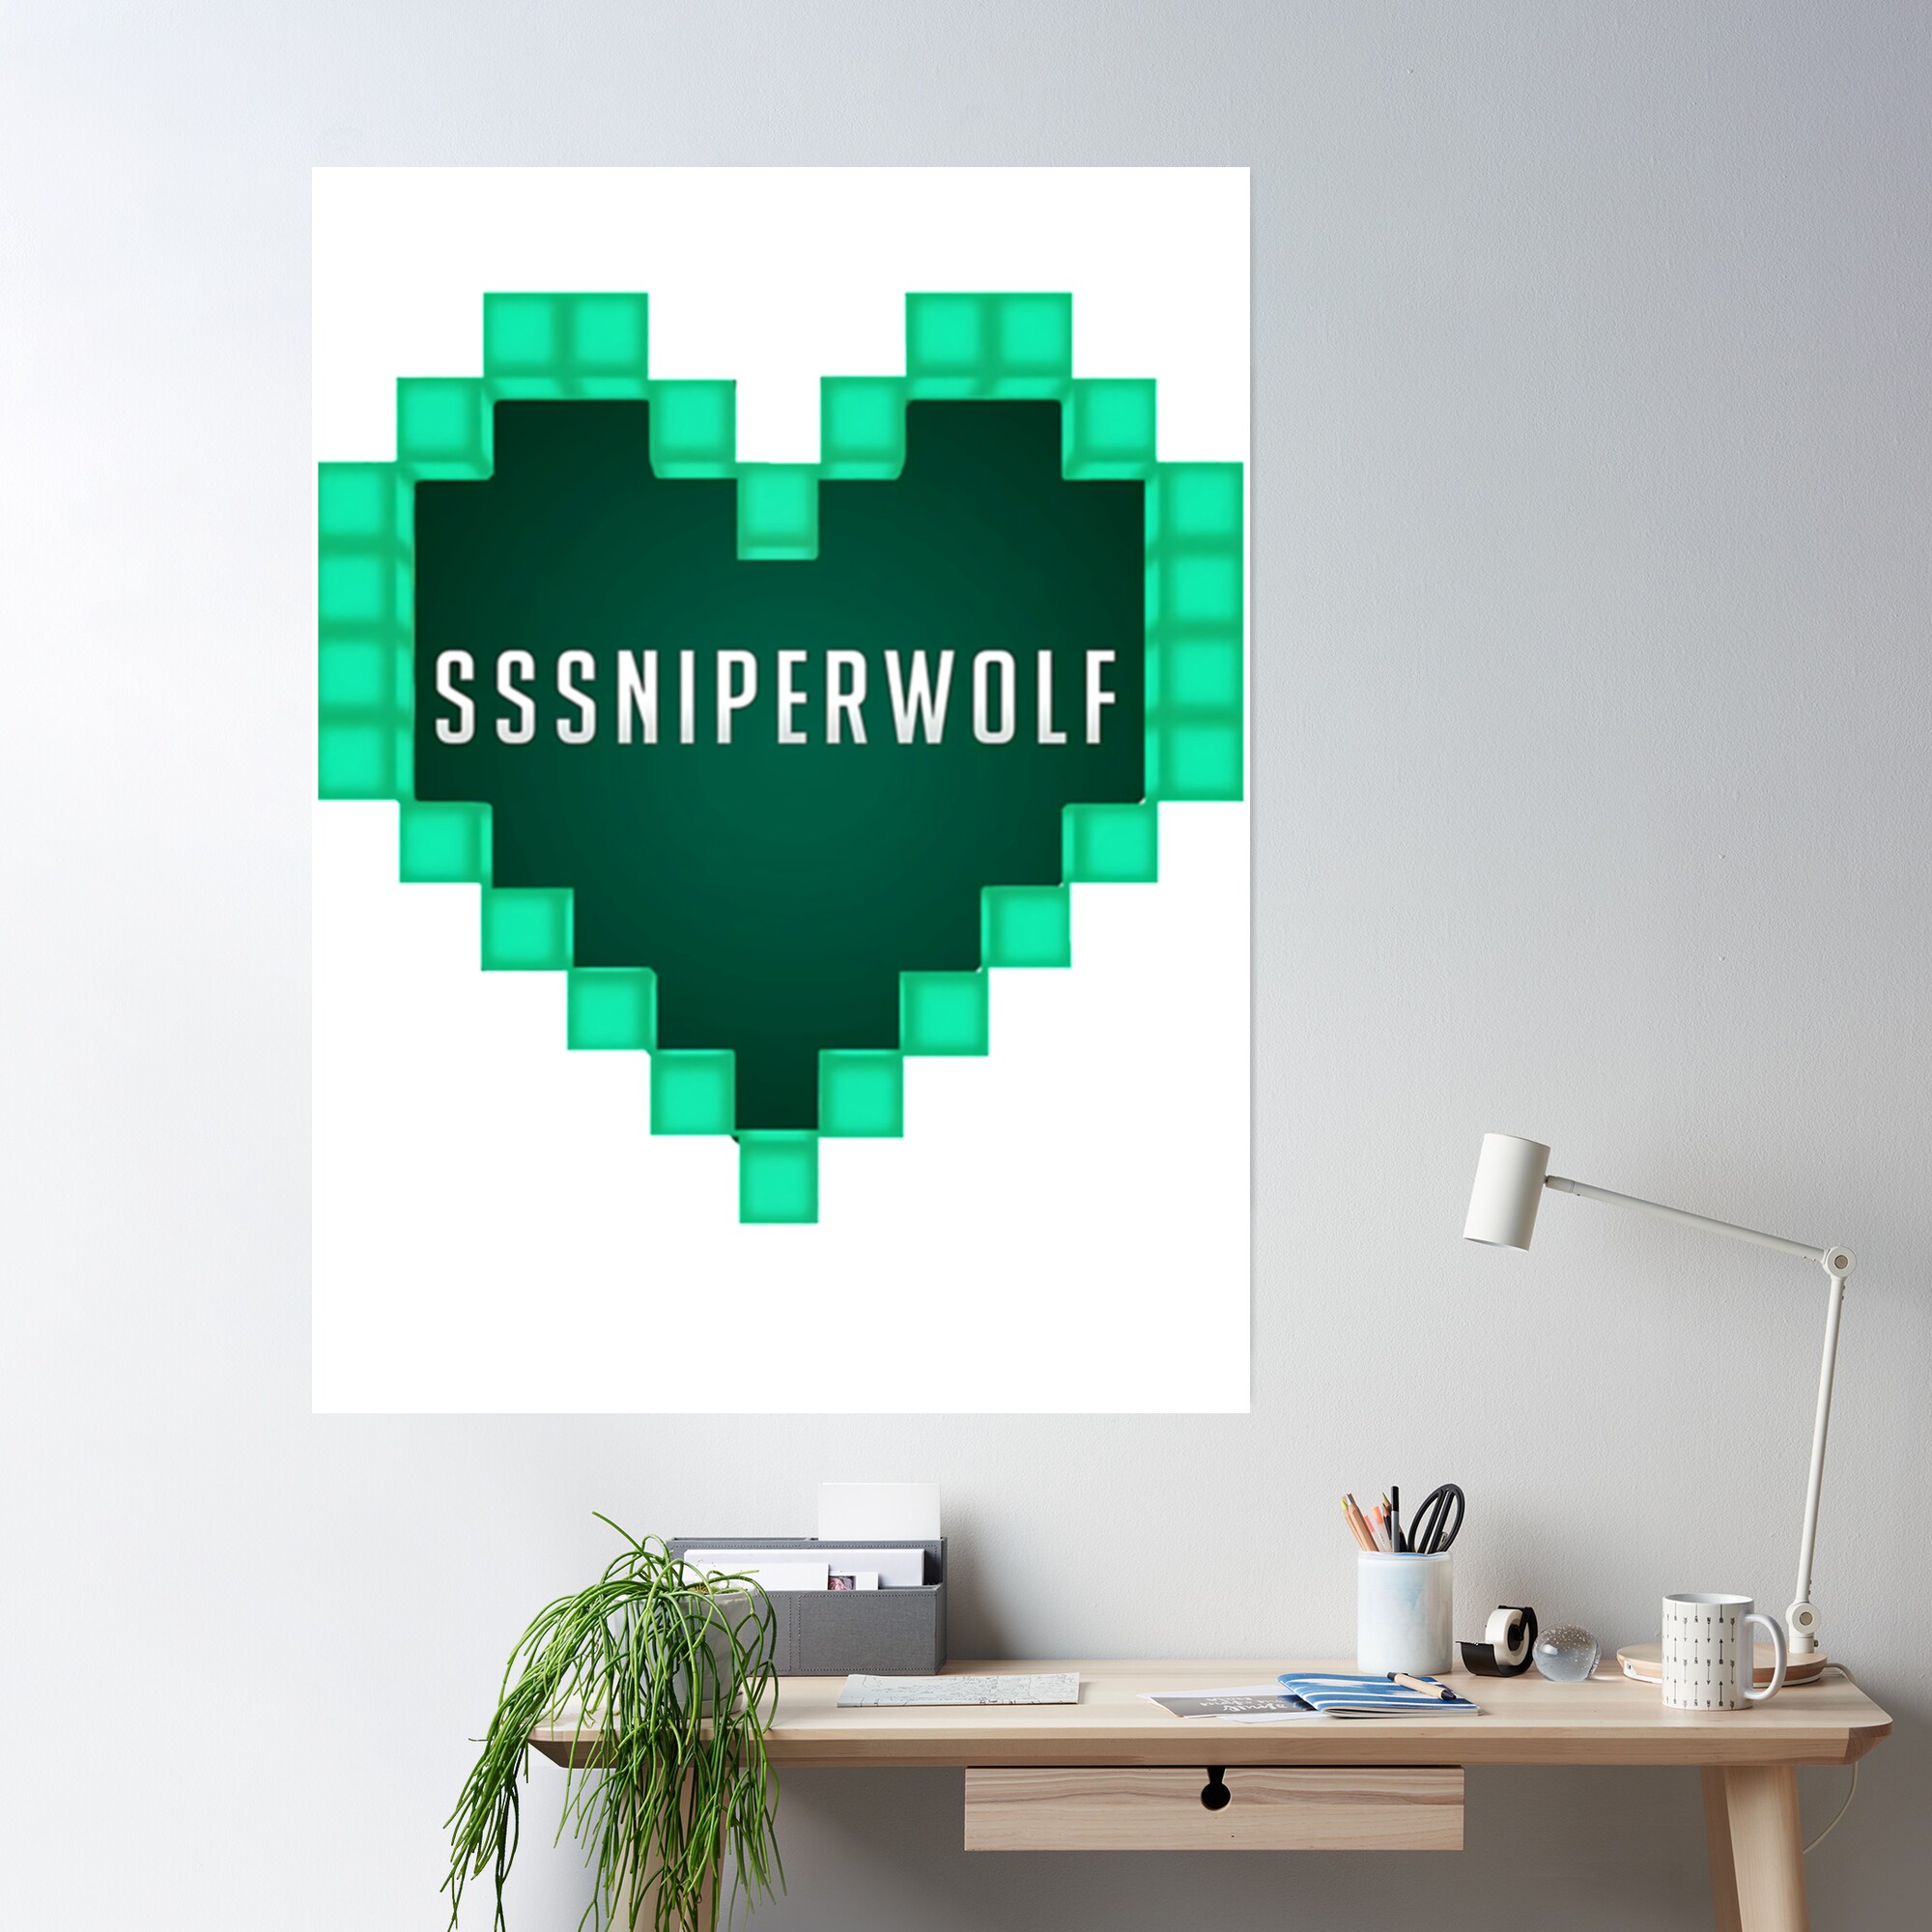 cposterlargesquare product2000x2000 8 - Sssniperwolf Store